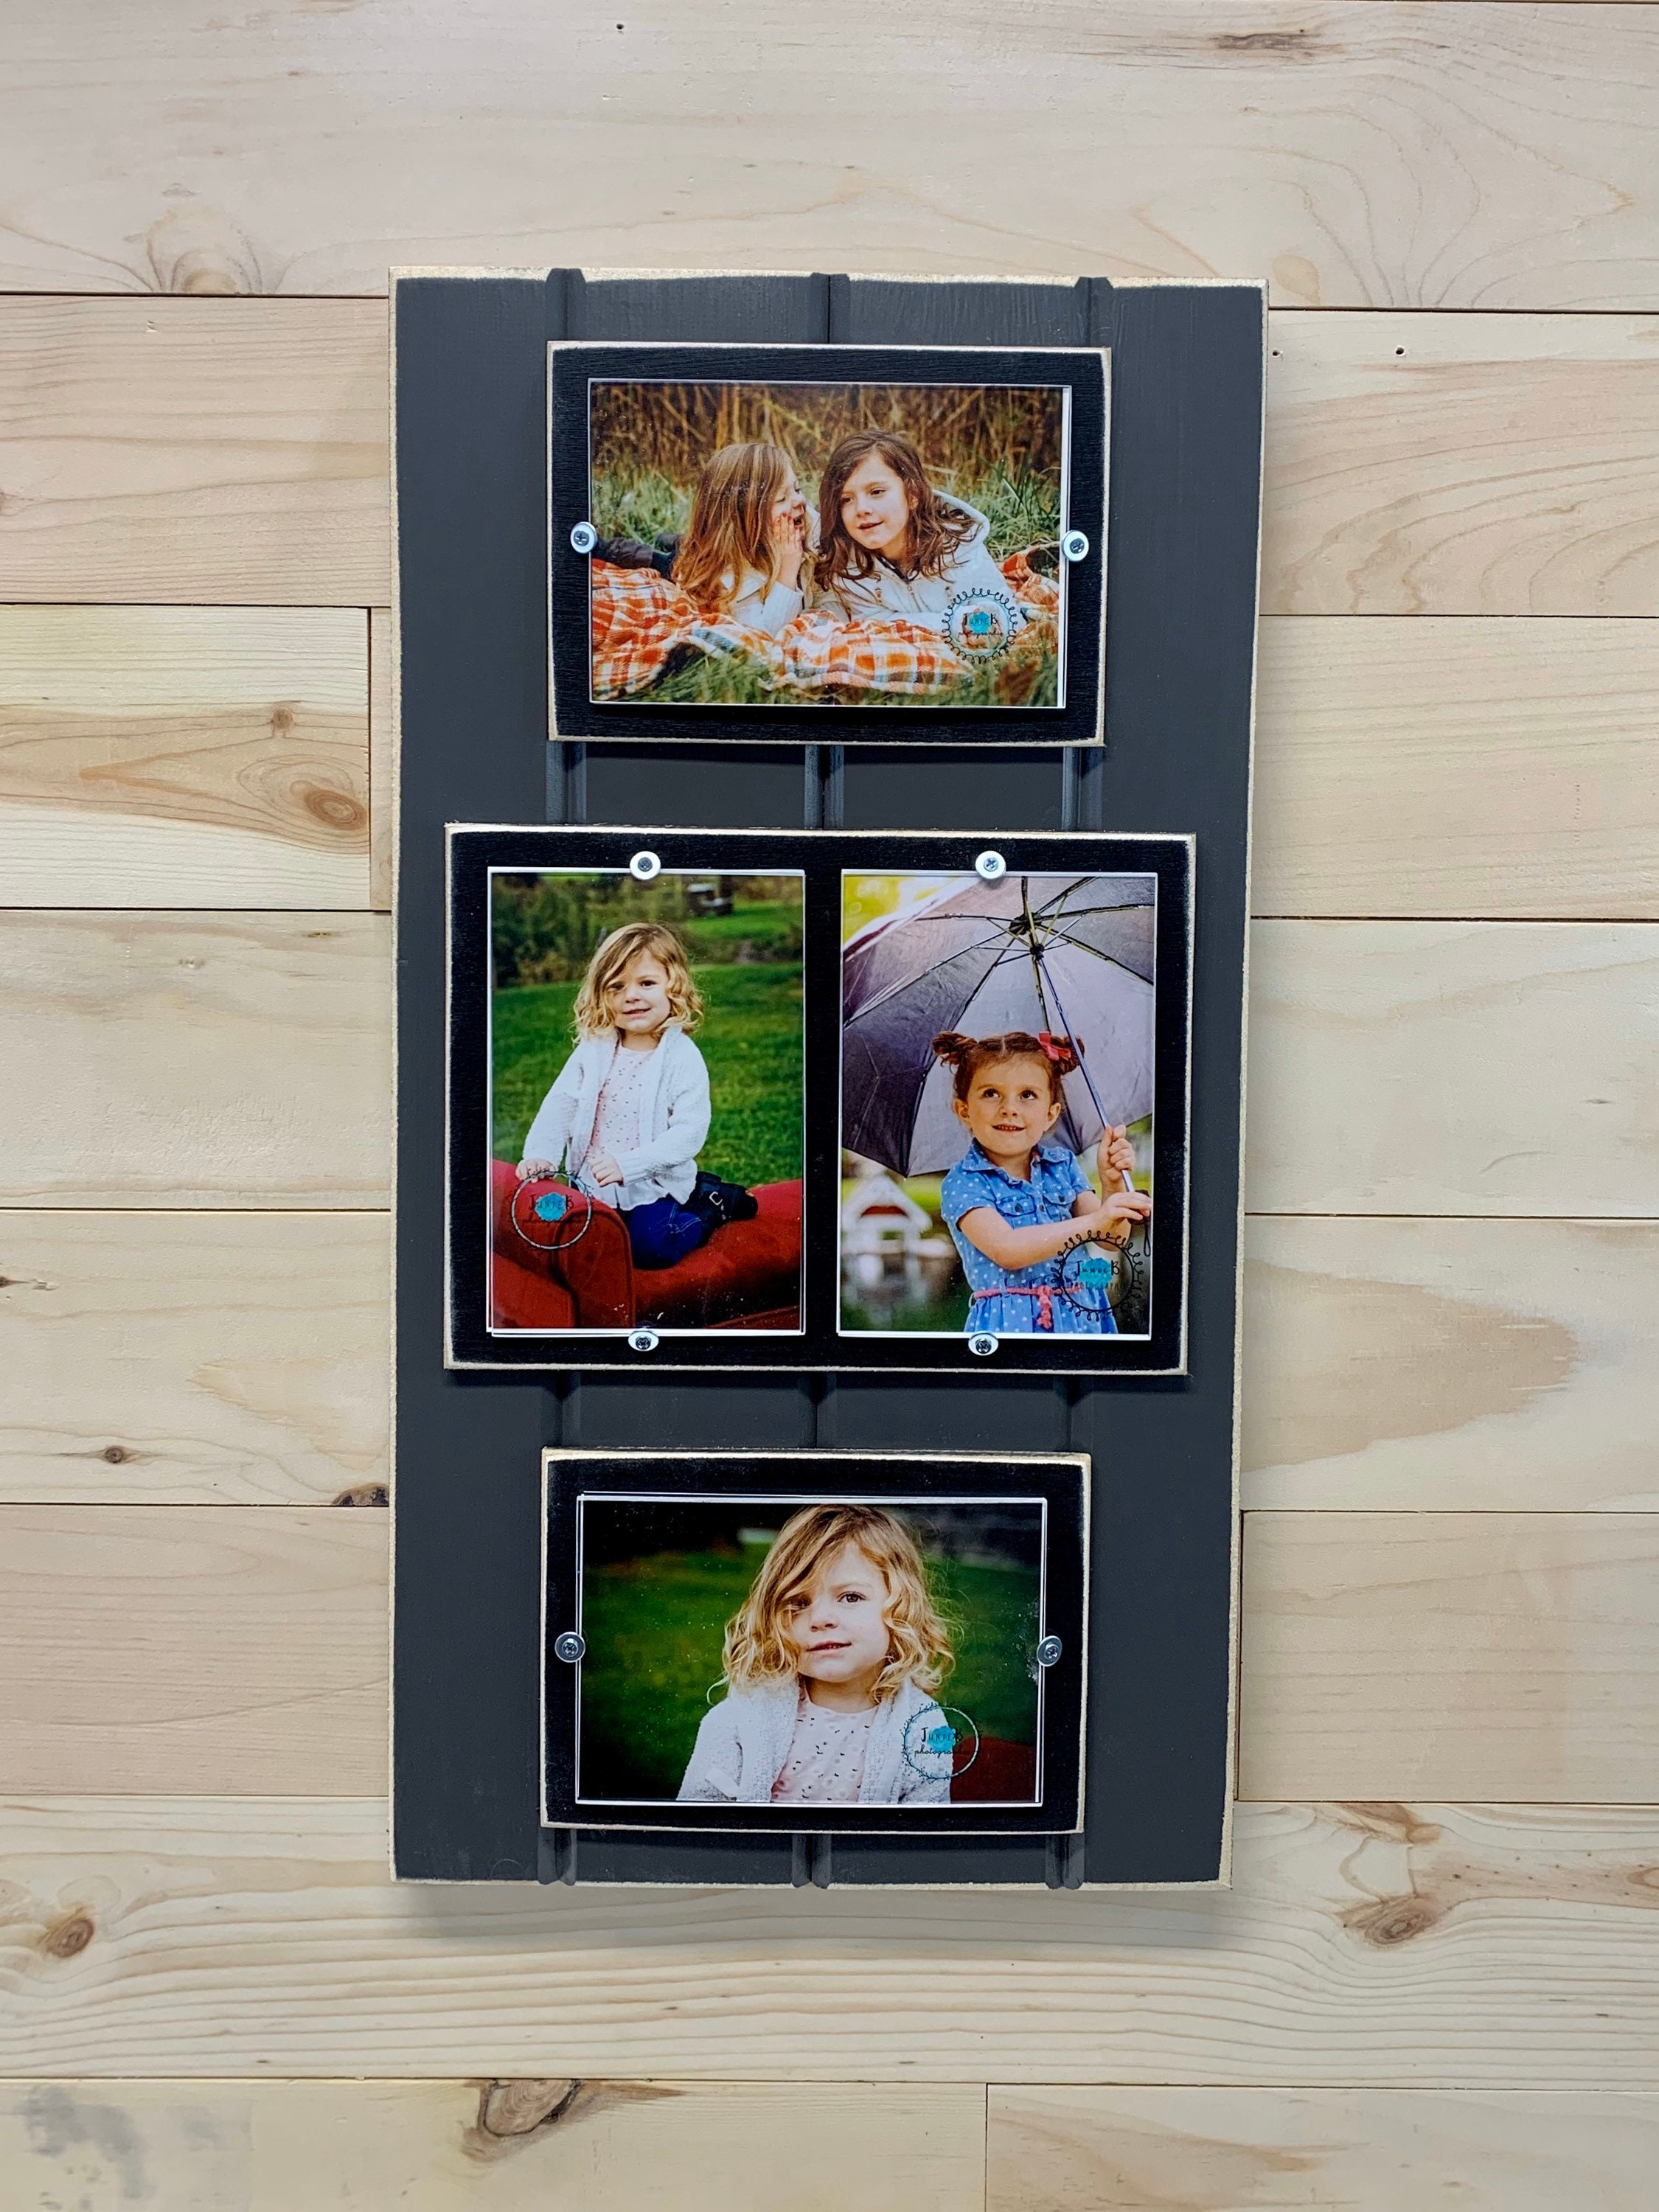 Spepla 4x6 Picture Frame Set of 4 with Tempered Glass, Rustic 4x6